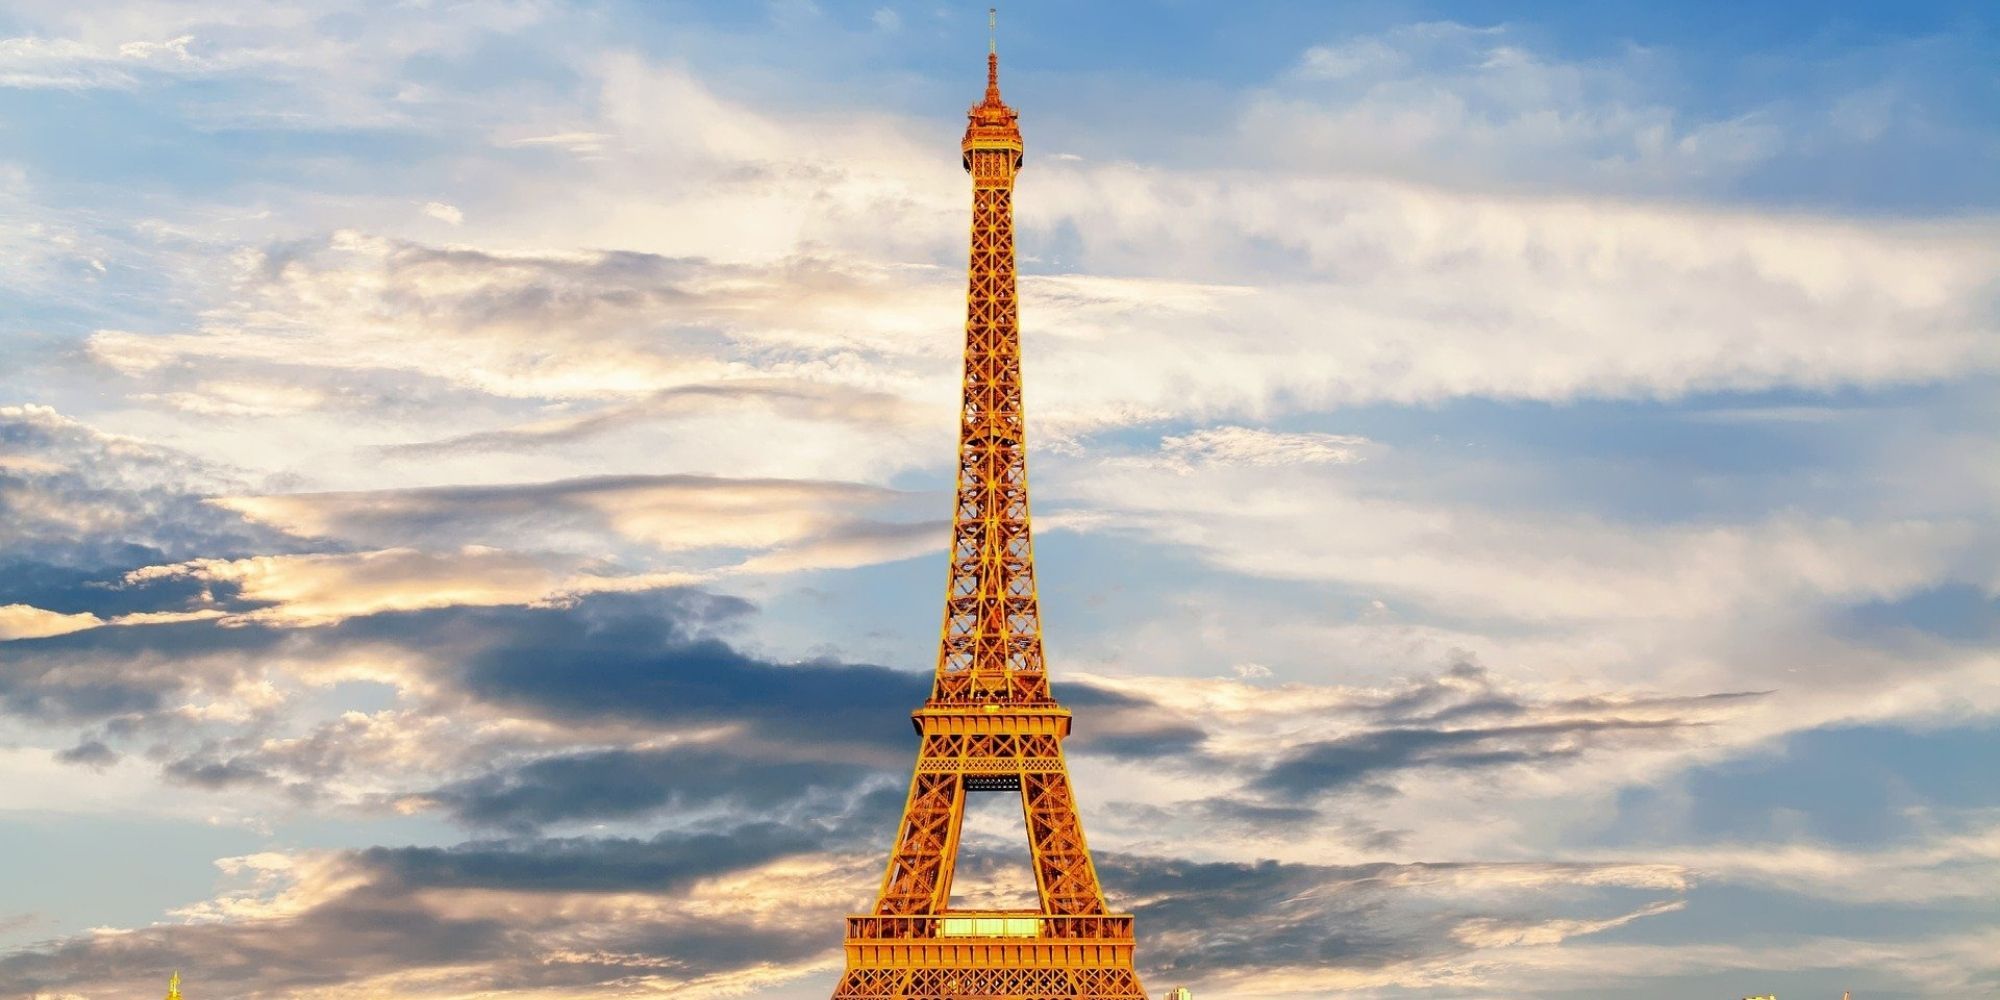 An image of the Eiffel Tower.